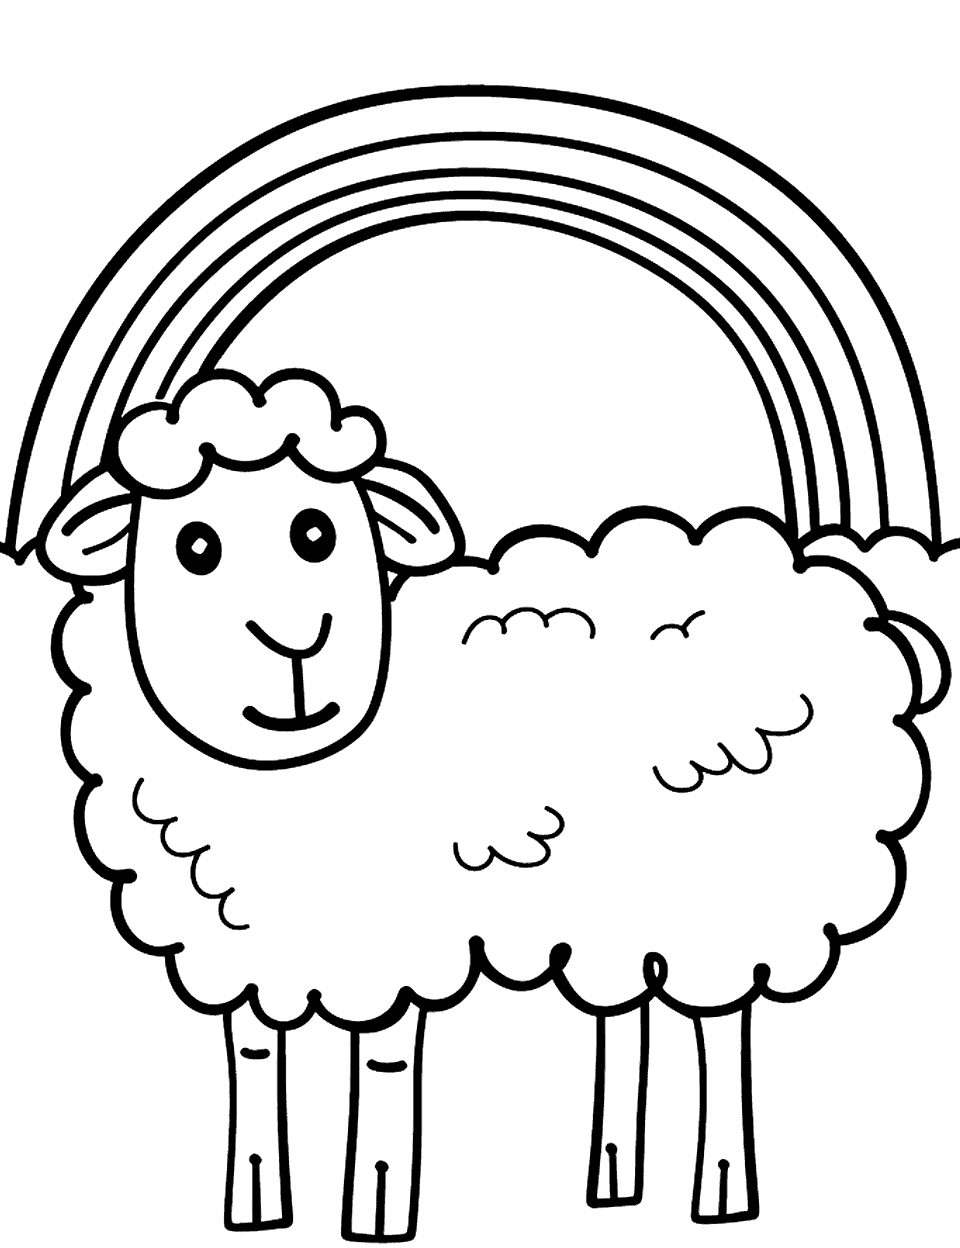 Rainbow Over Sheep Coloring Page - A rainbow arching over a sheep looking up in wonder.